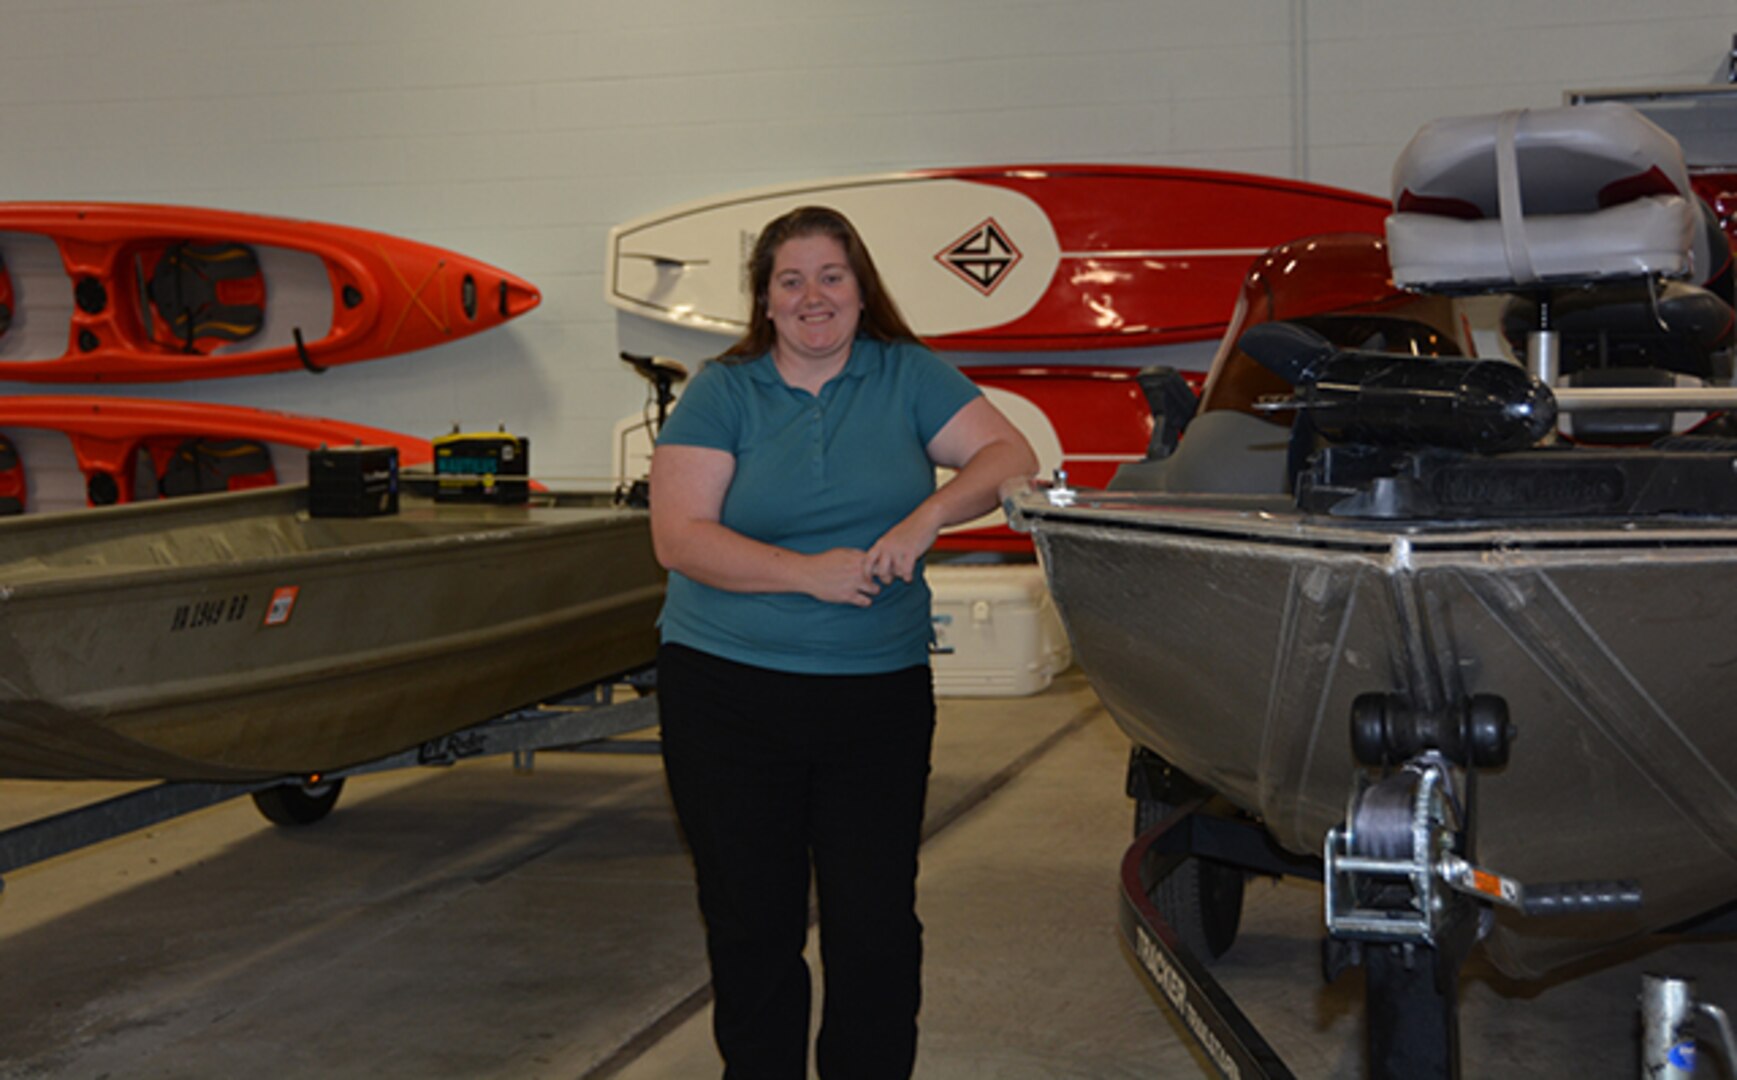 Cutshall poses in front of Outdoor Recreation watercraft